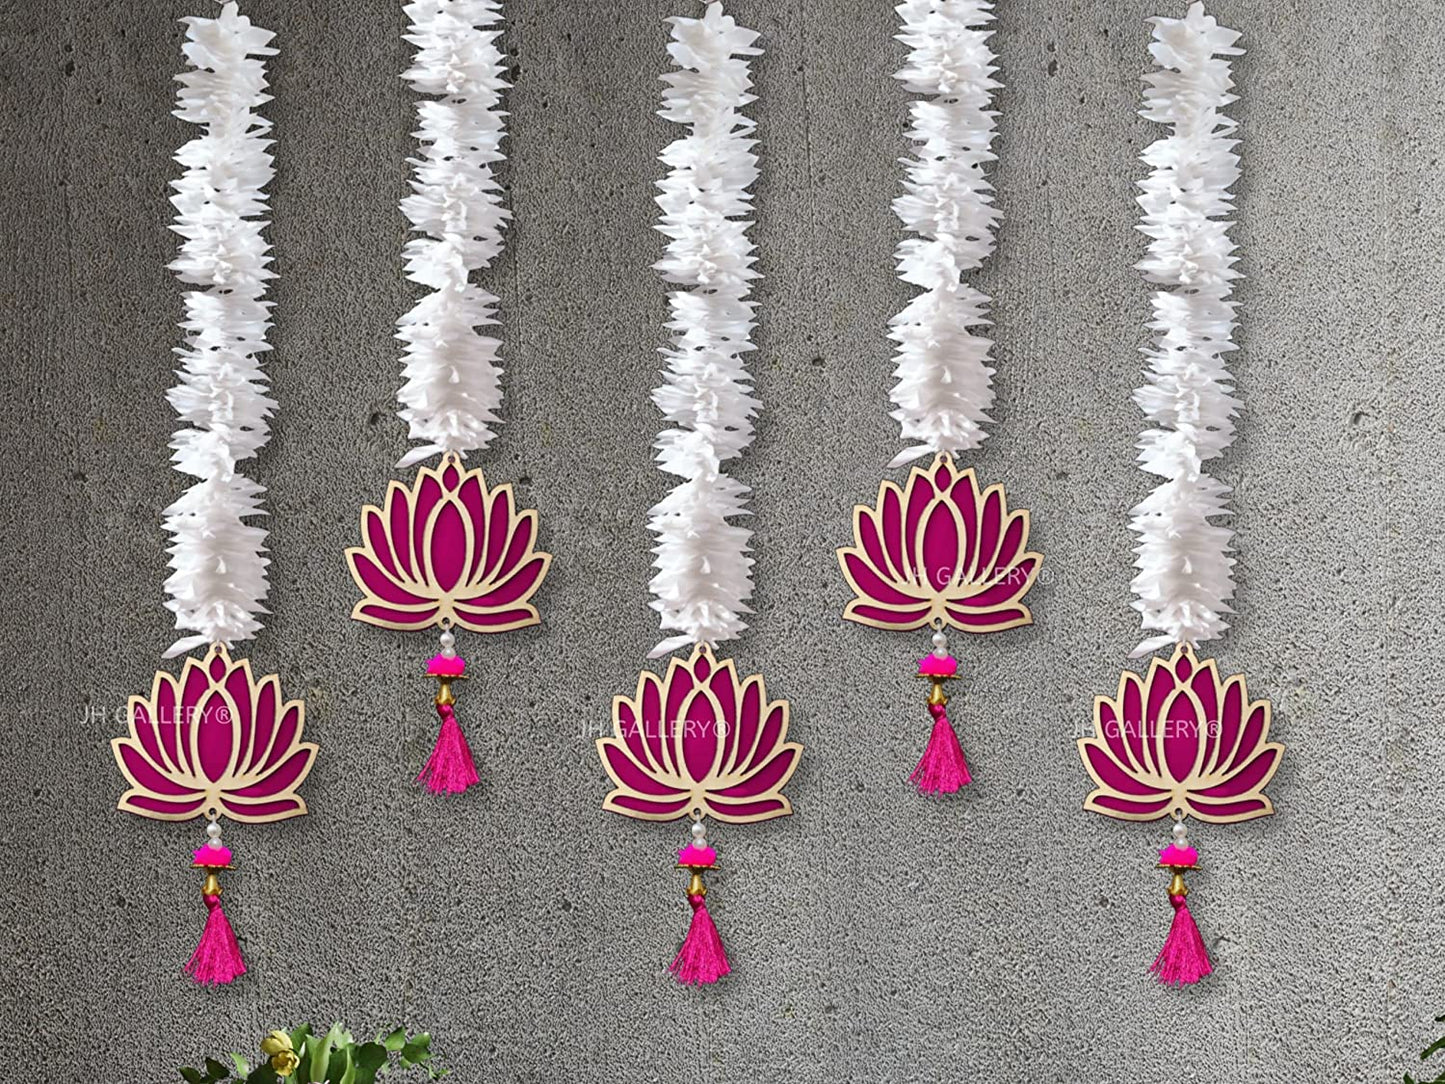 Lotus Hangings for Decoration/ Floral Wall Hangings for Temple Decor, showpiece for Home Decor Mangal Fashions | Indian Home Decor and Craft